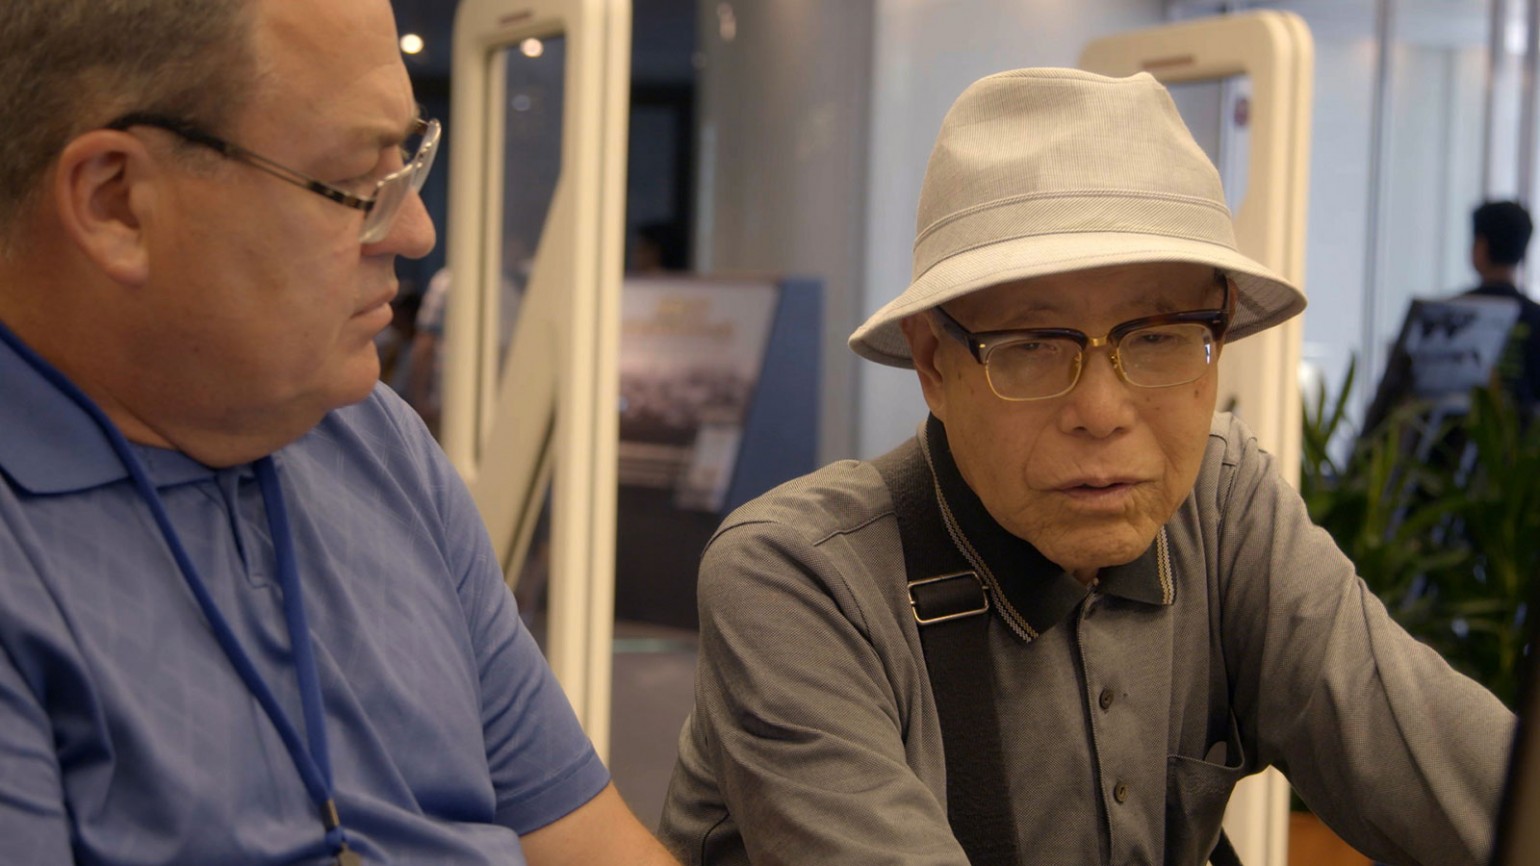 Ralph Neal and Mr. Mori in conversation. Photo courtesy of Room 203 Films.